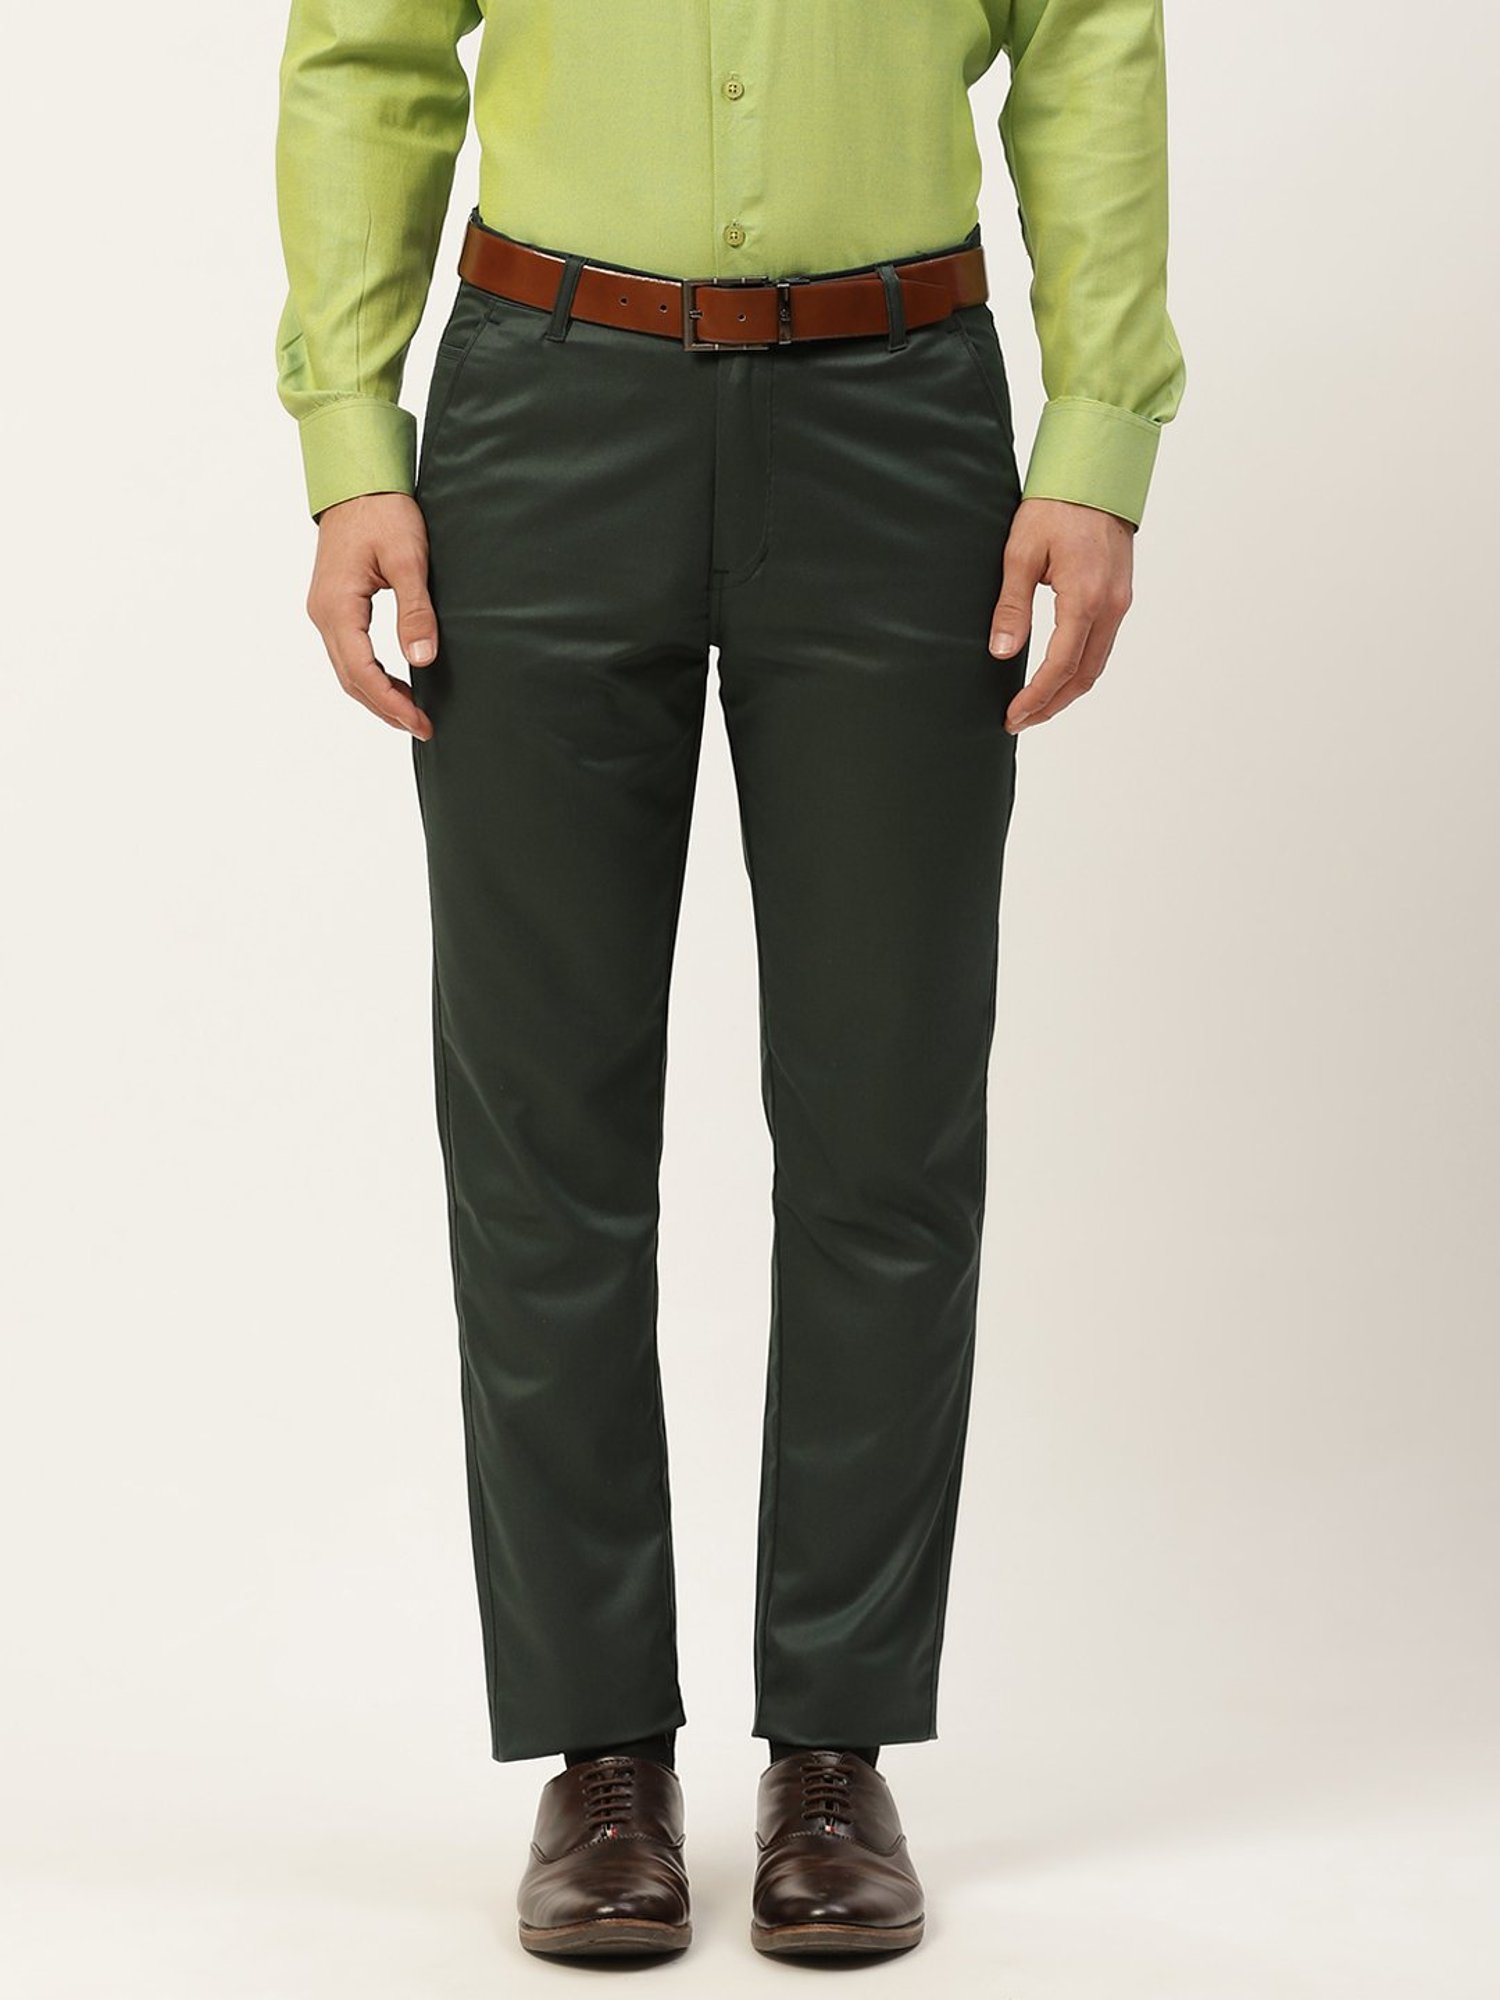 PLAYERS Mens Slim Fit Formal Trouser Combo Olive Green  Beige